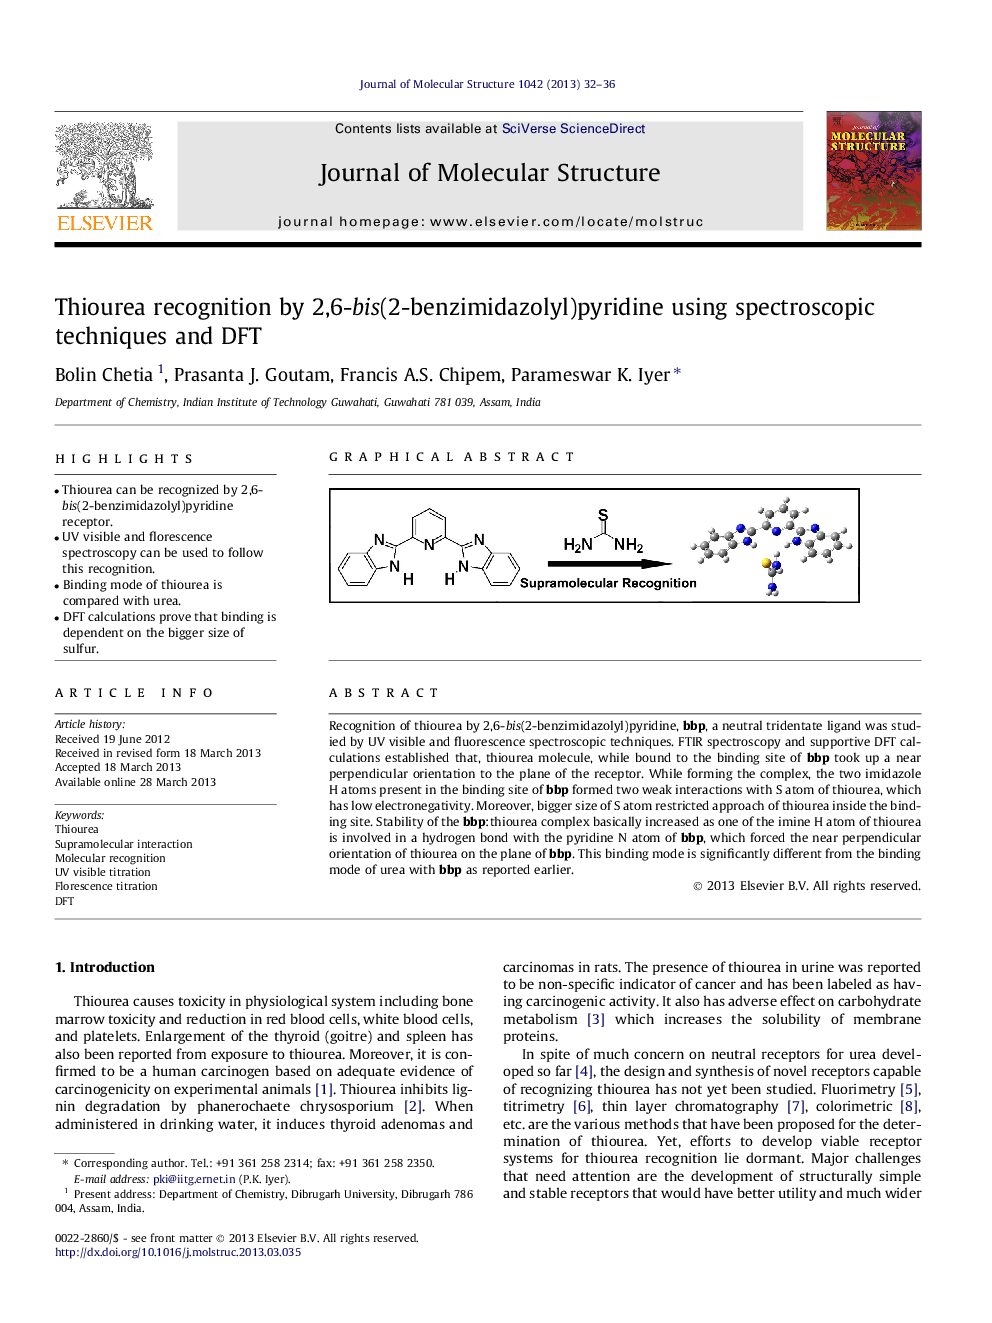 Thiourea recognition by 2,6-bis(2-benzimidazolyl)pyridine using spectroscopic techniques and DFT